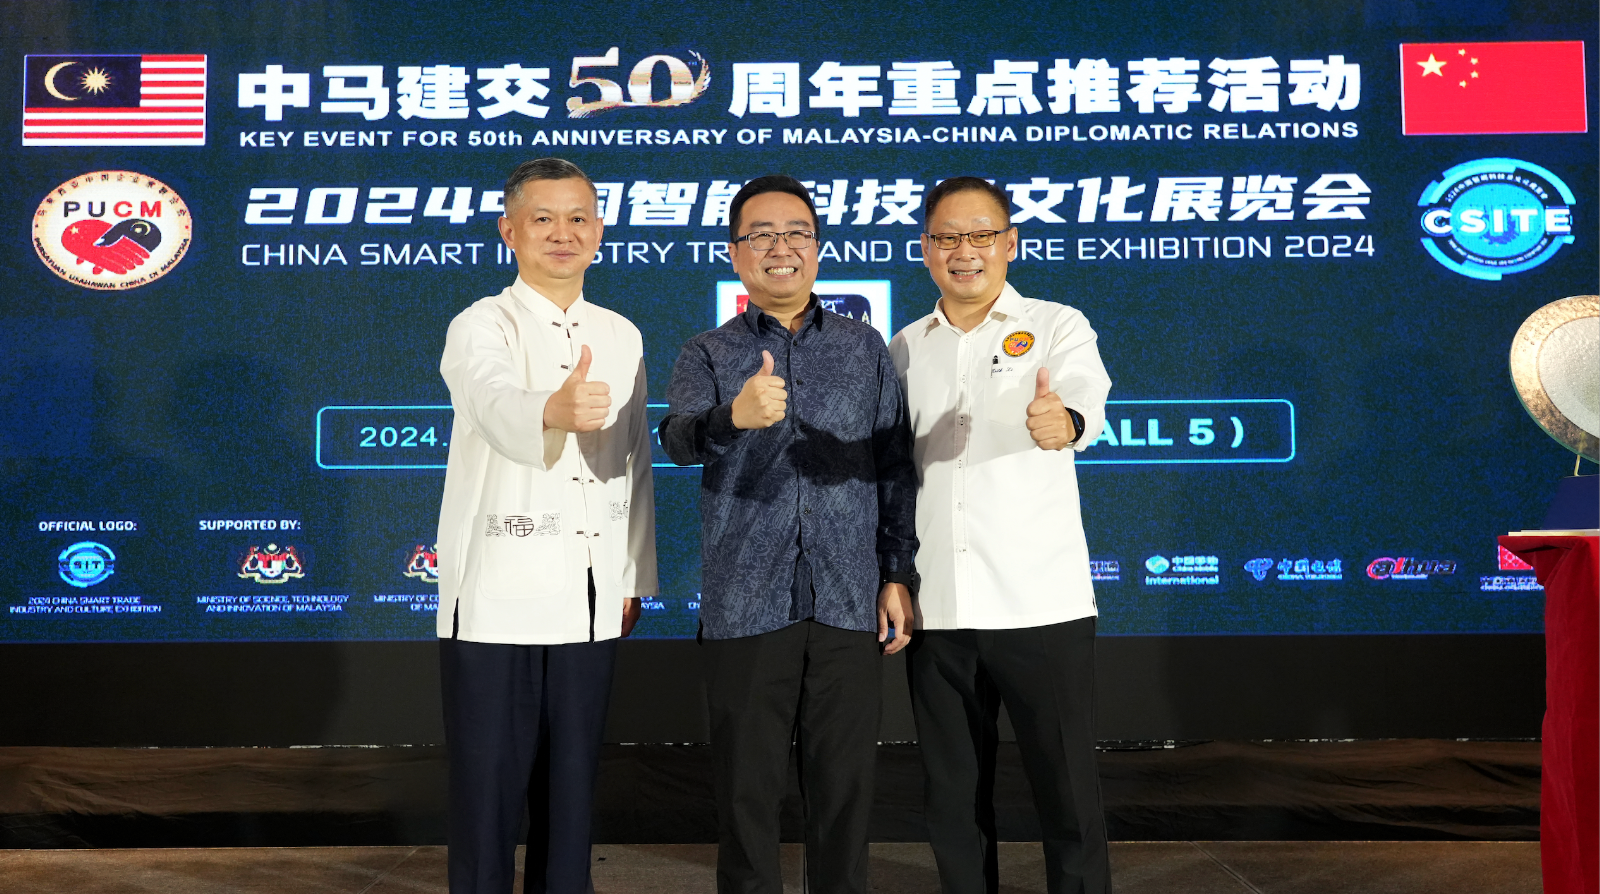 MOSTI Minister YB Chang Lih Kang and Zheng Xuefang launched PUCM's 2024 SCITE